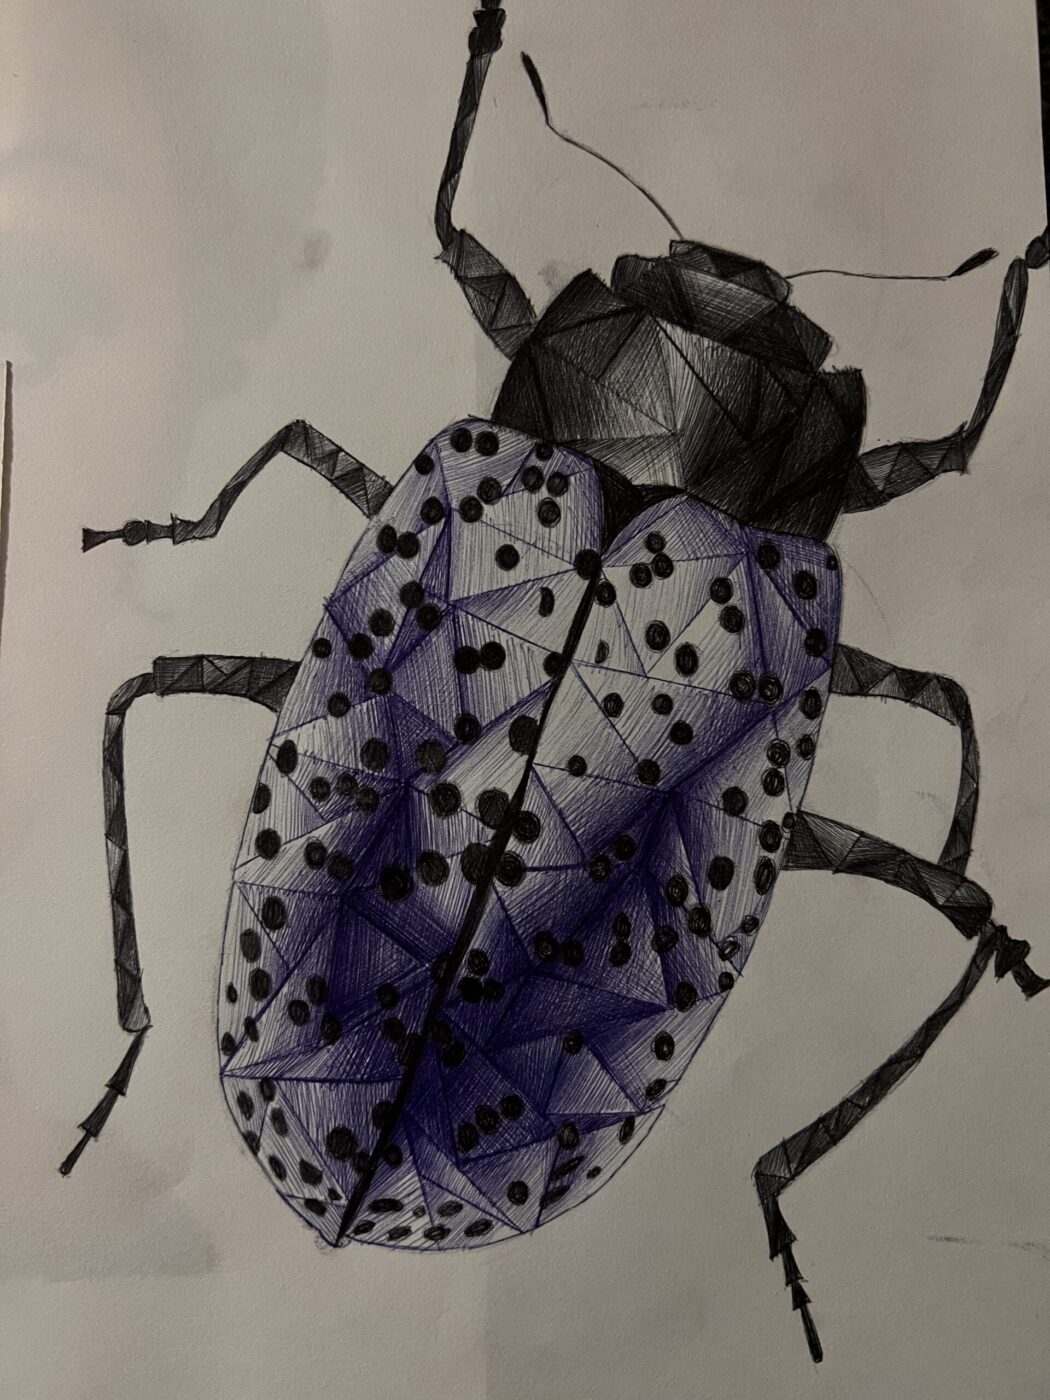 On the Move by Siyona Bhandari, 2nd place in 13-18 category, Insect Week 2022 art competition